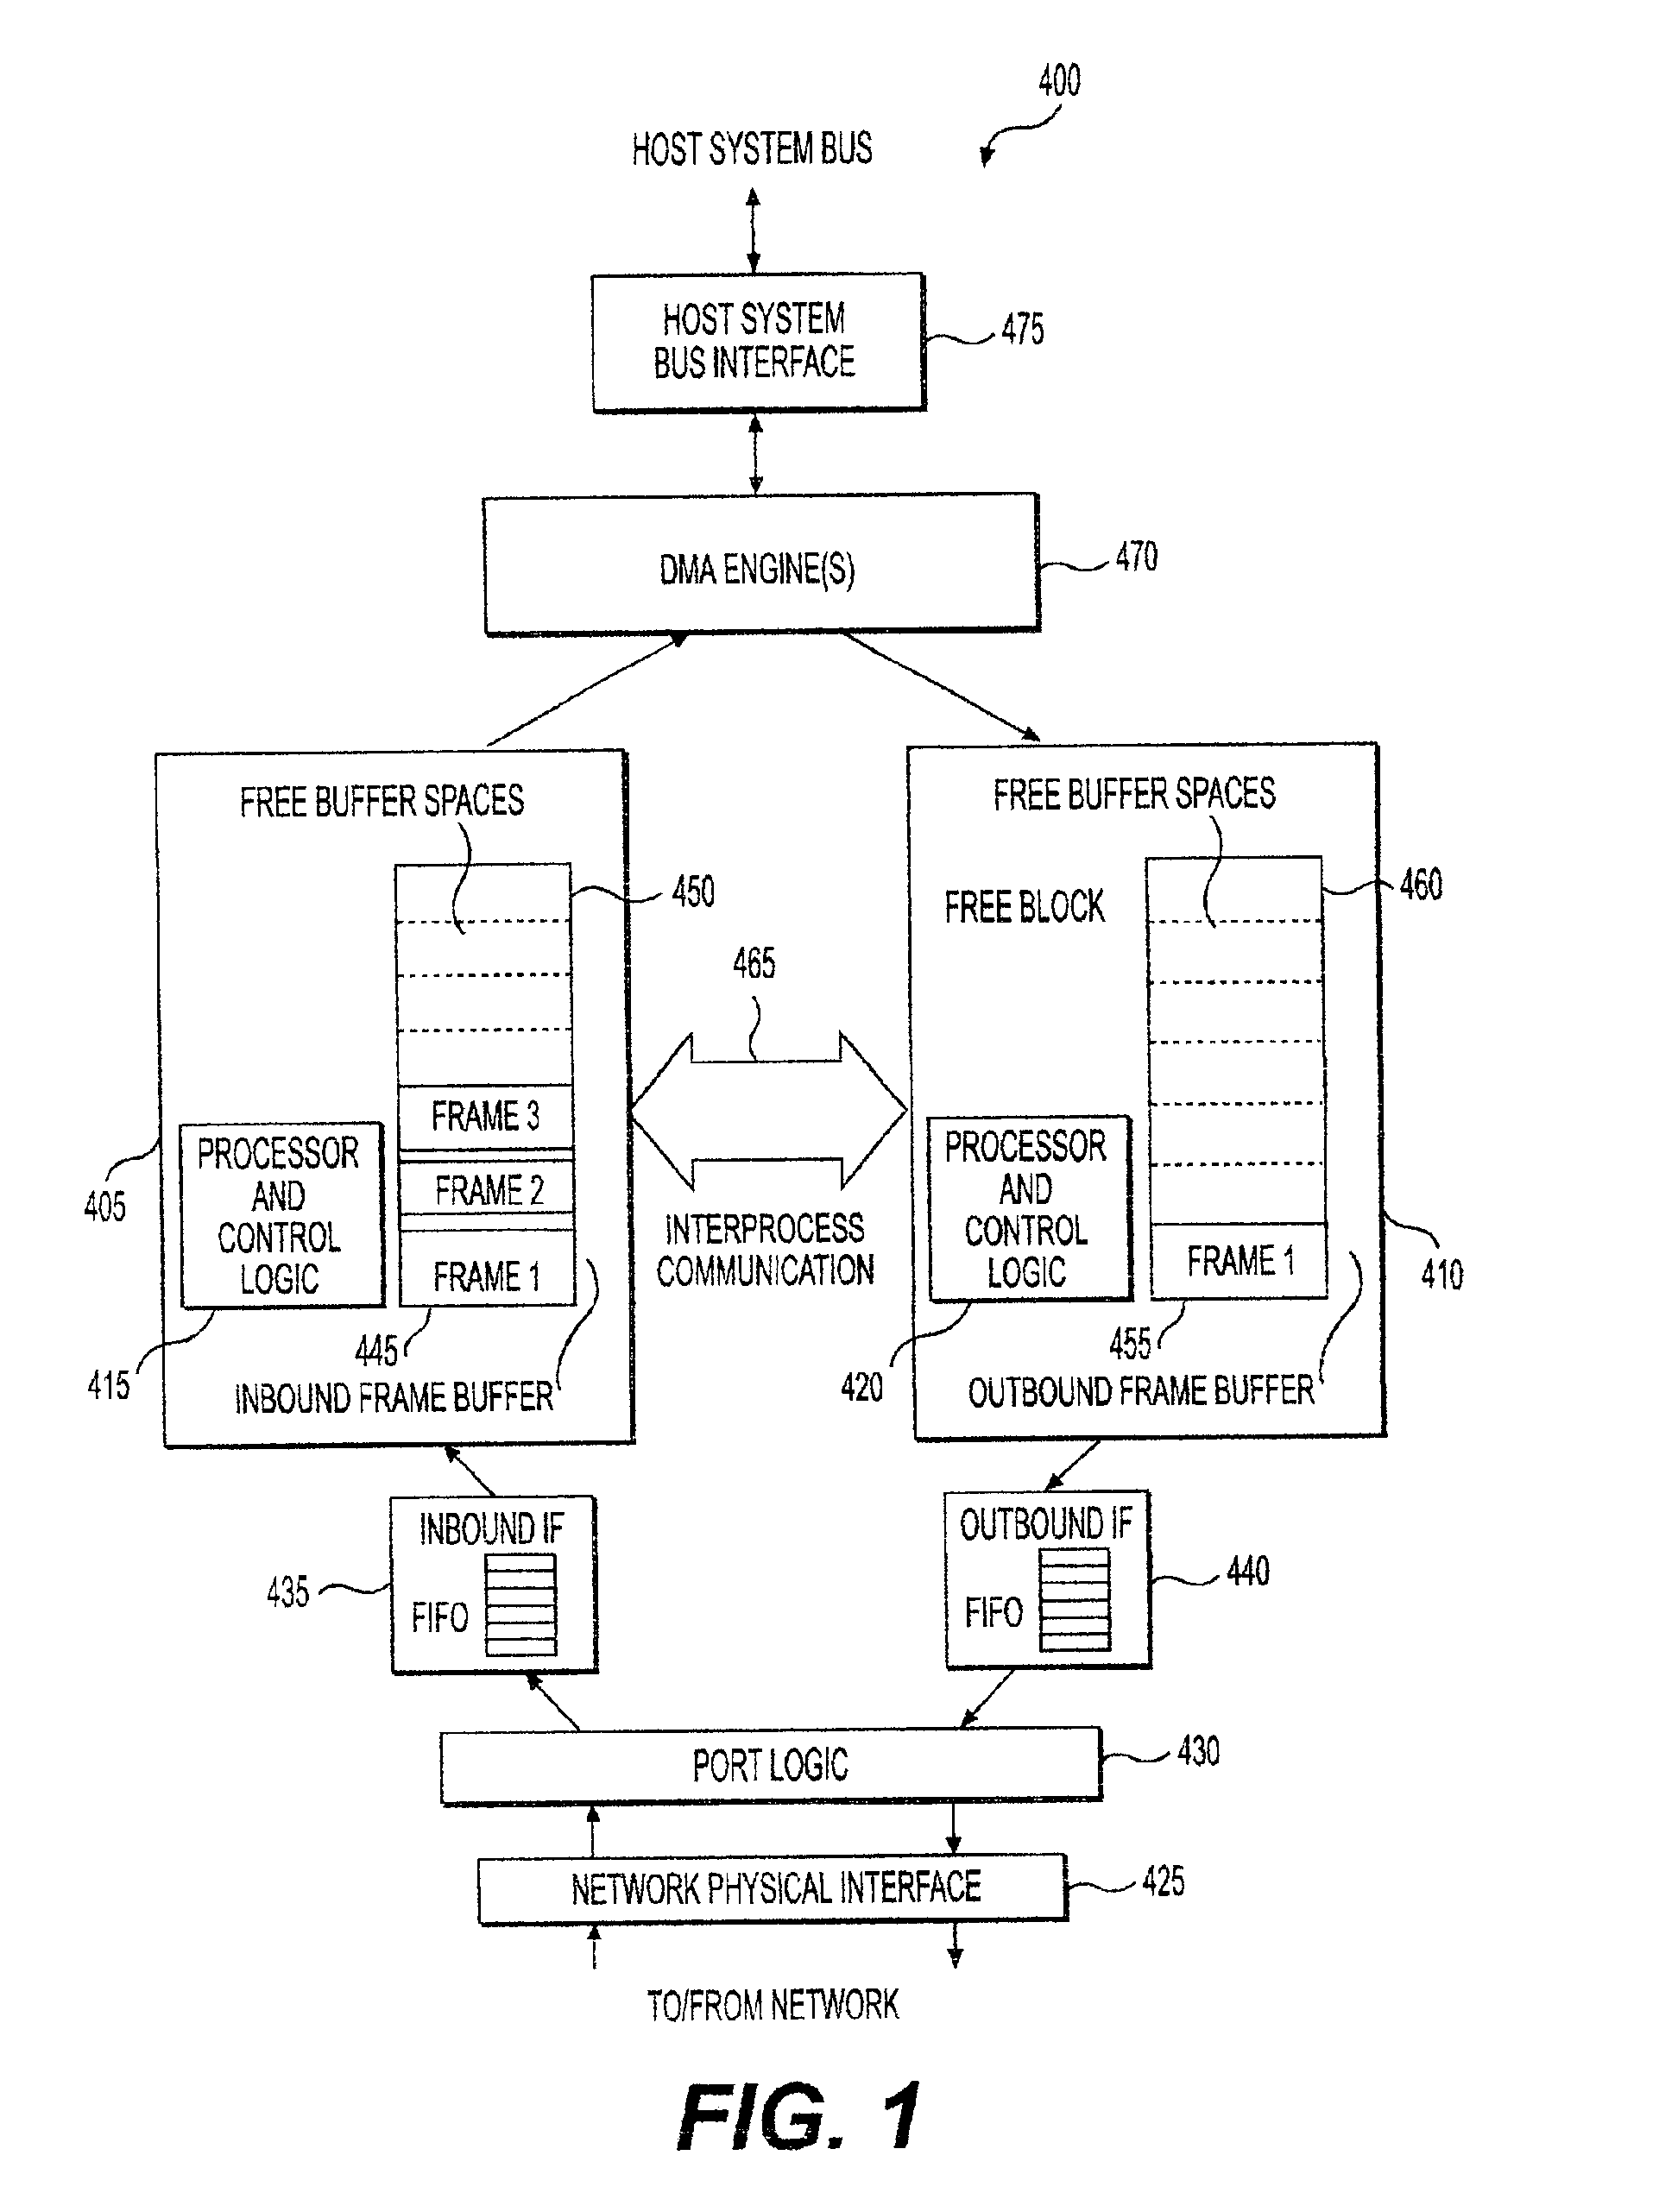 Dynamic memory allocation between inbound and outbound buffers in a protocol handler